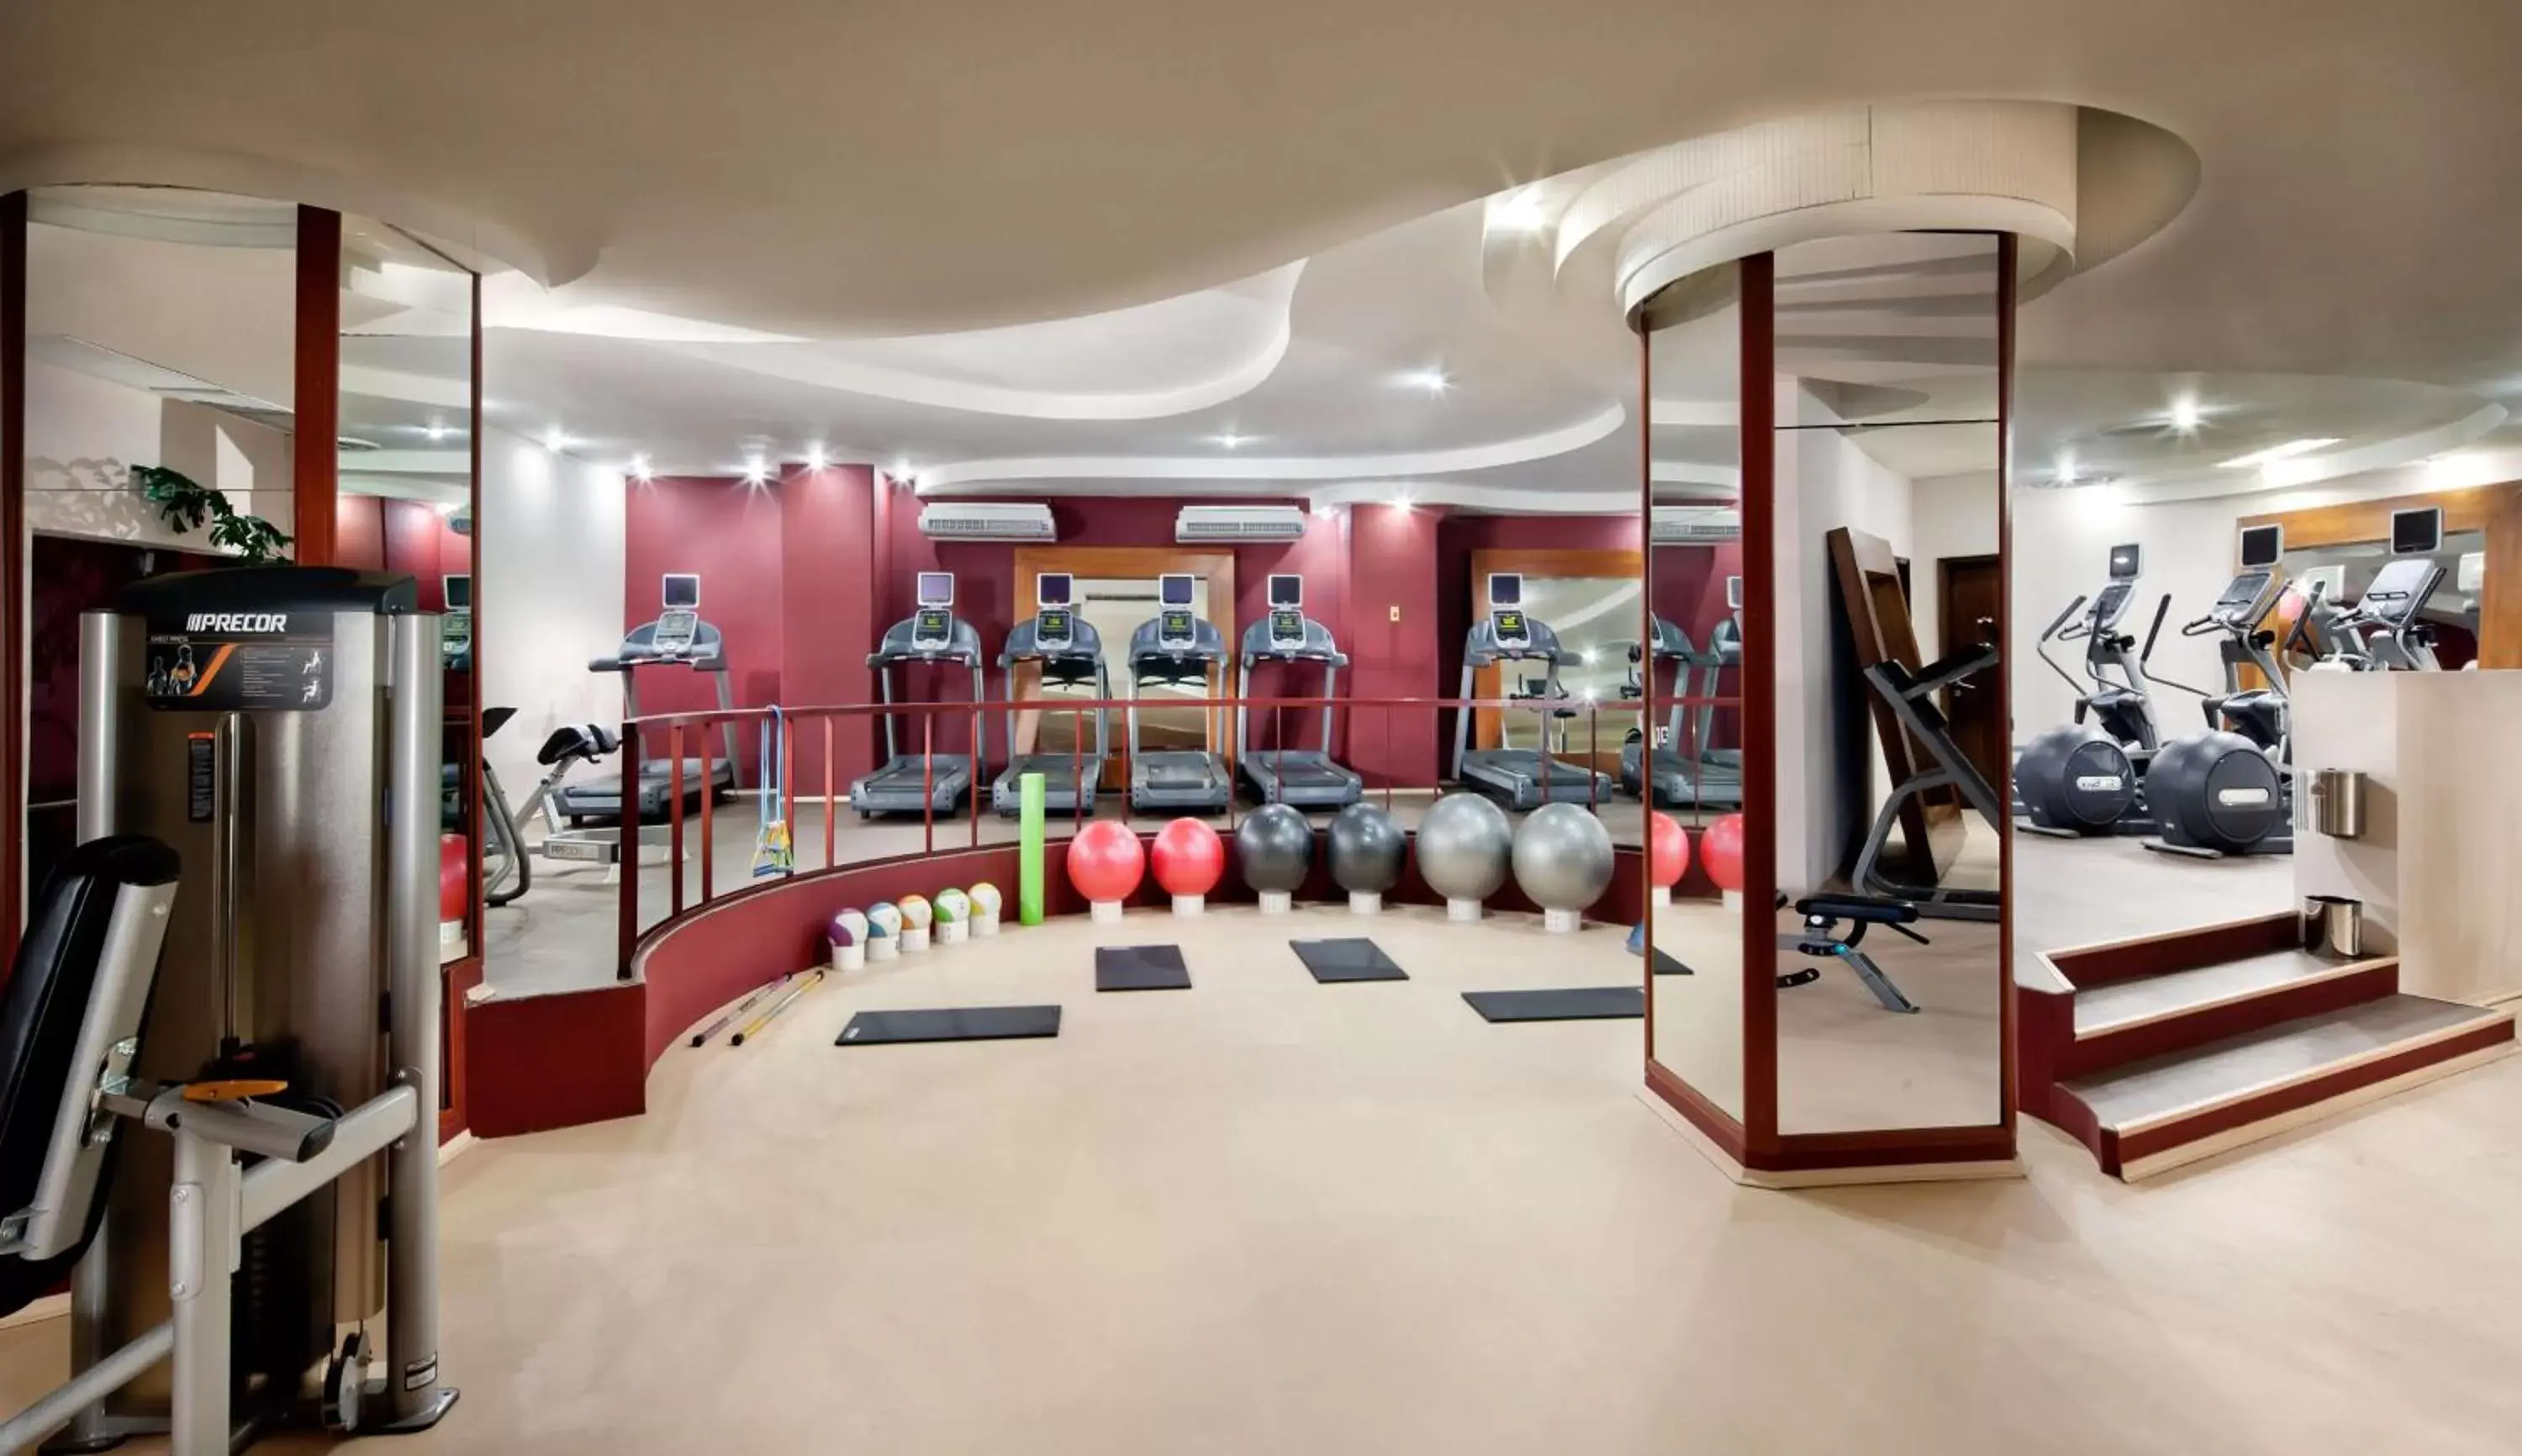 Fitness centre/facilities, Fitness Center/Facilities in Hilton Yaounde